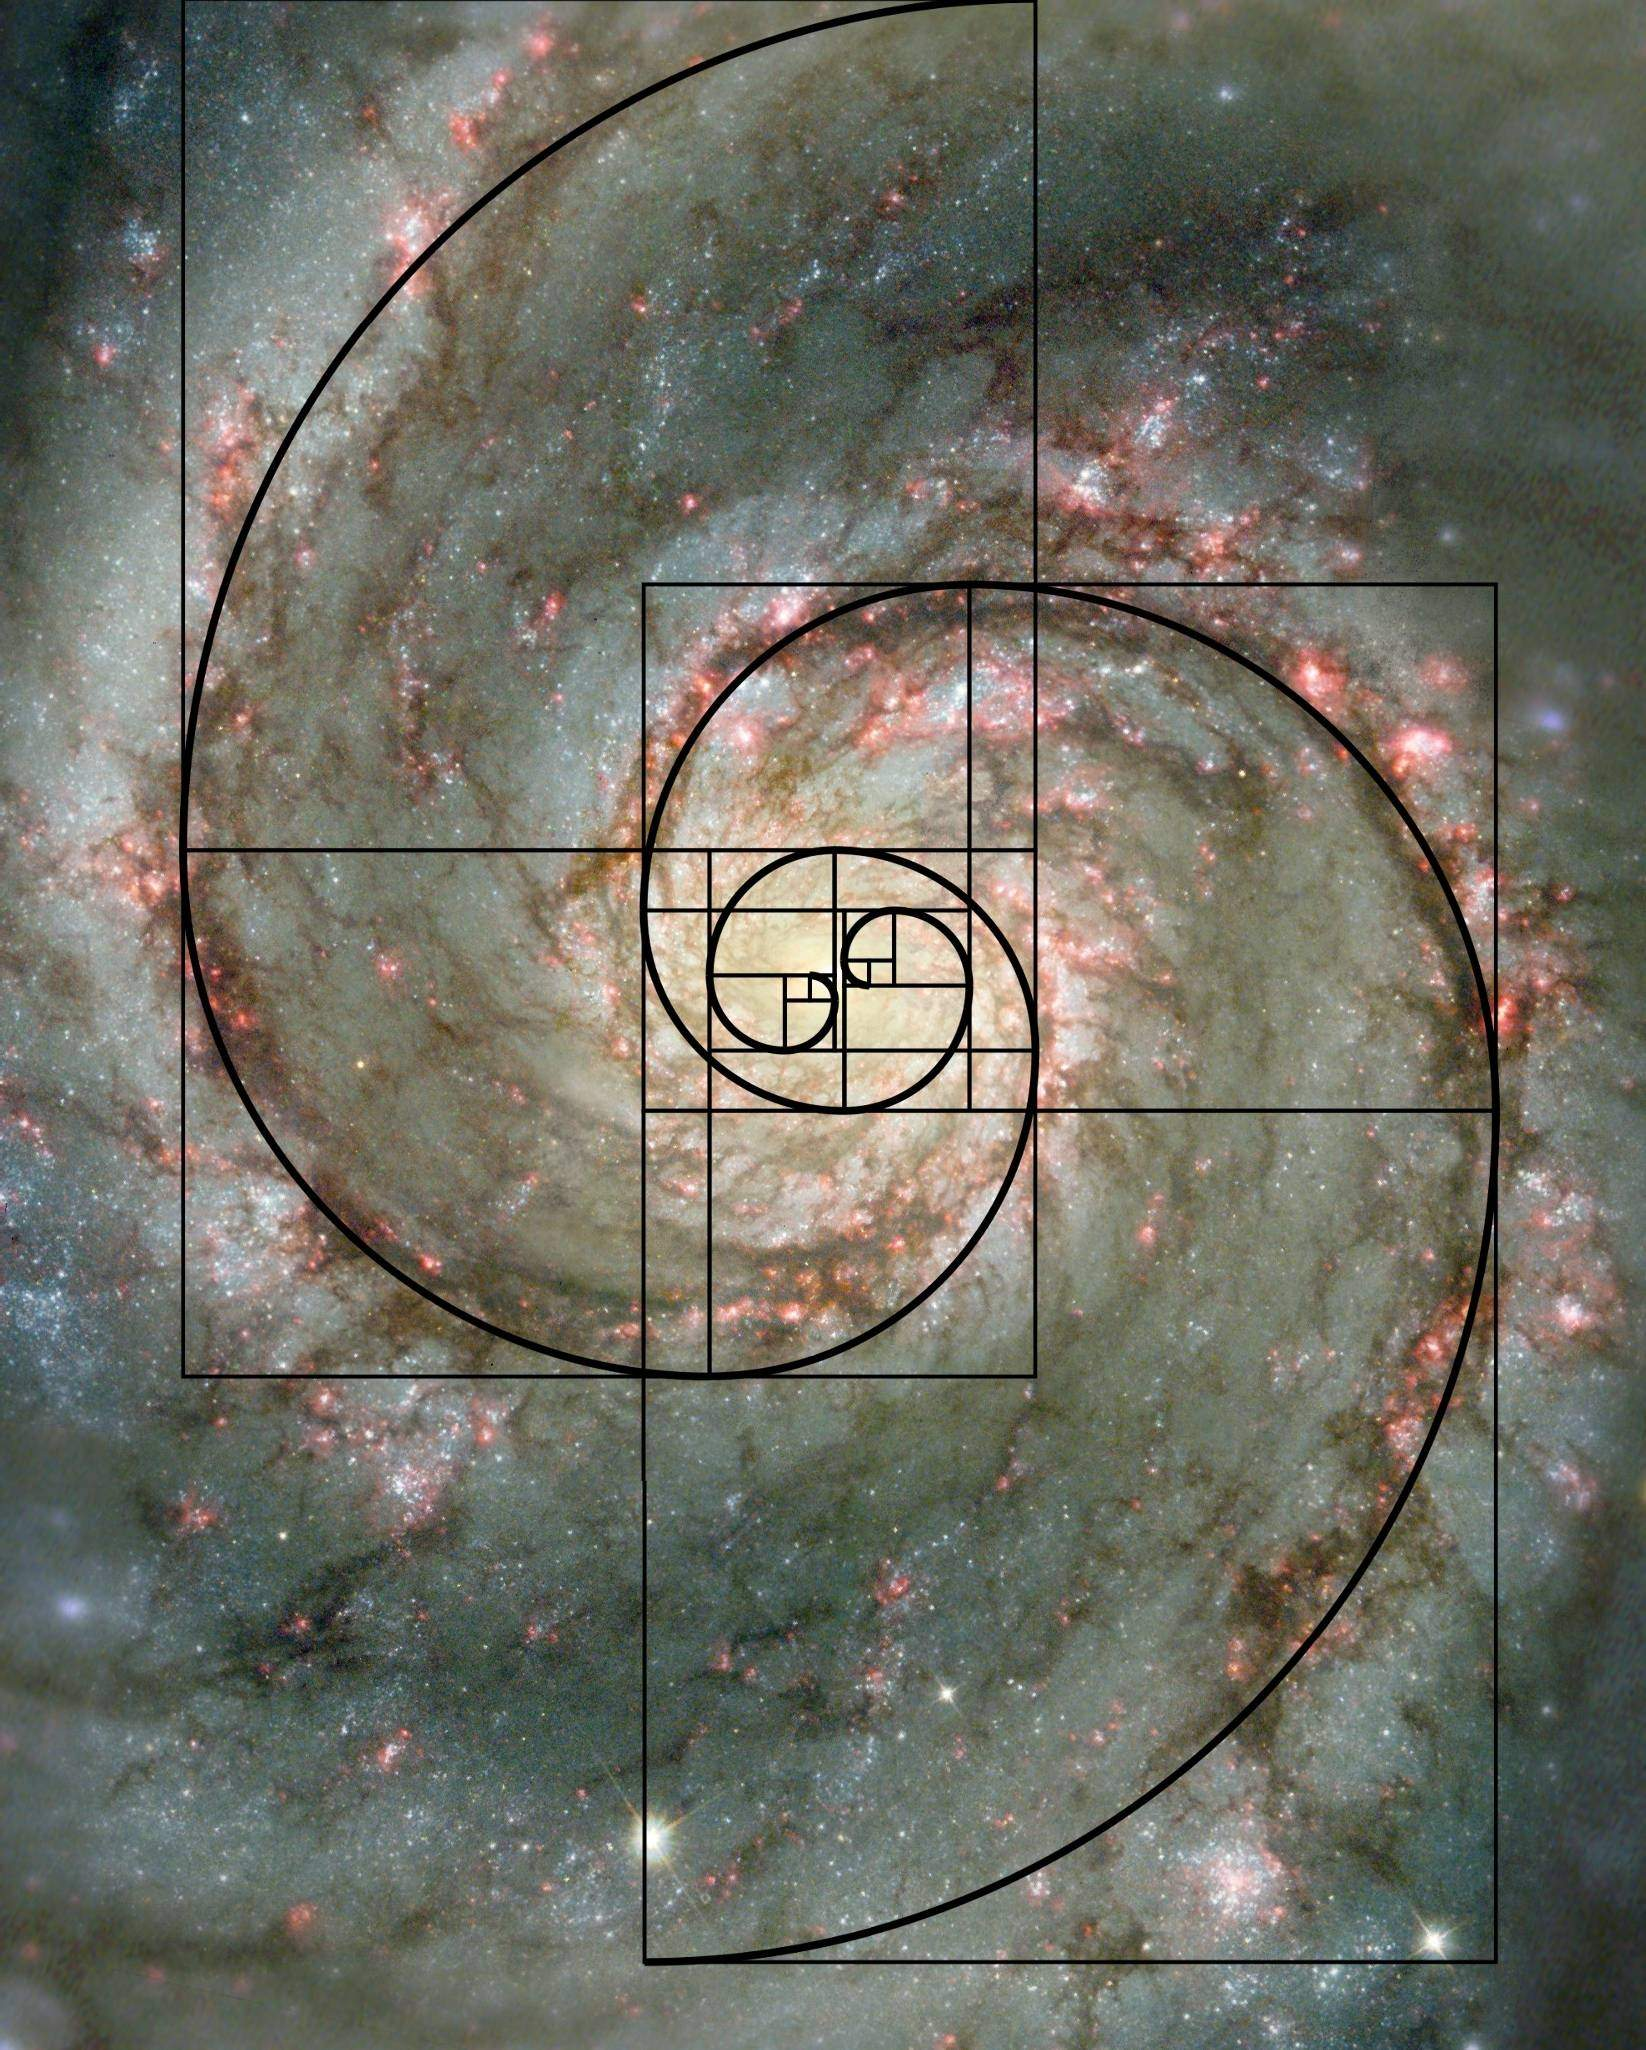 [Translate to English:] The Fibonacci numbers and the golden ratio appear naturally in science and your everyday life. This spiral galaxy has the shape of the golden spiral and is just one out of many examples where the golden ratio occurs.